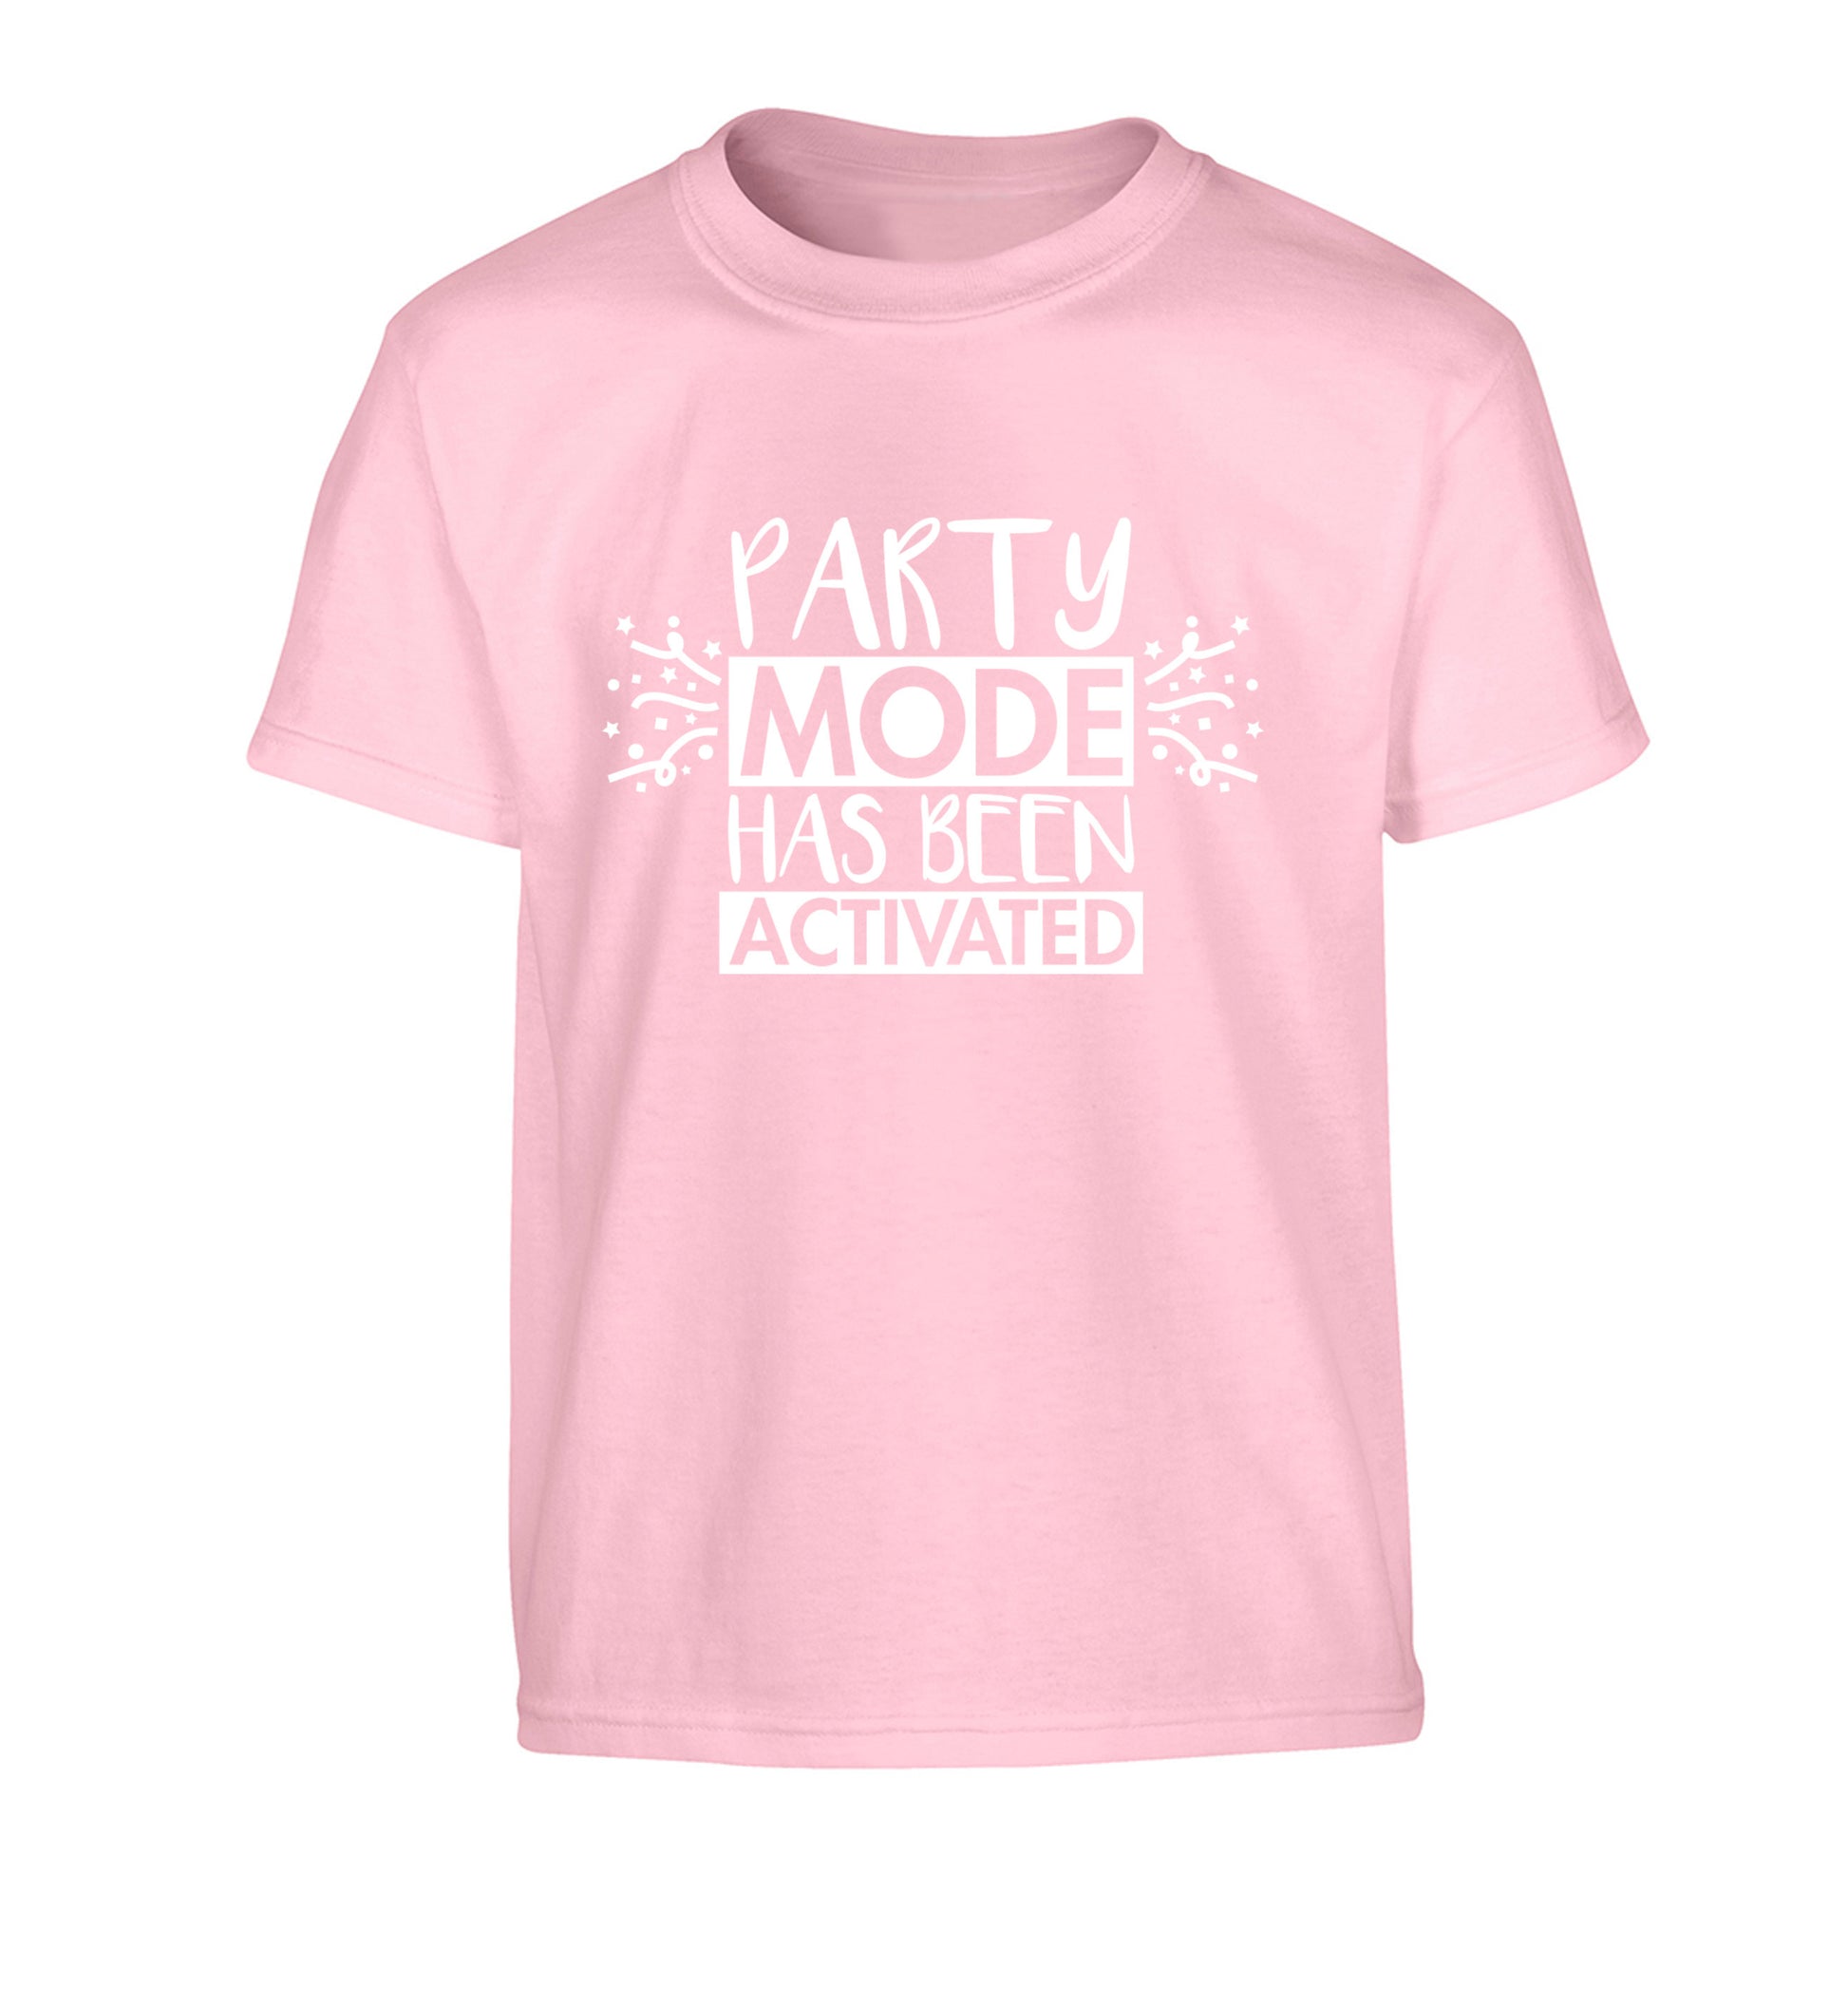 Please do not disturb party mode has been activated Children's light pink Tshirt 12-14 Years